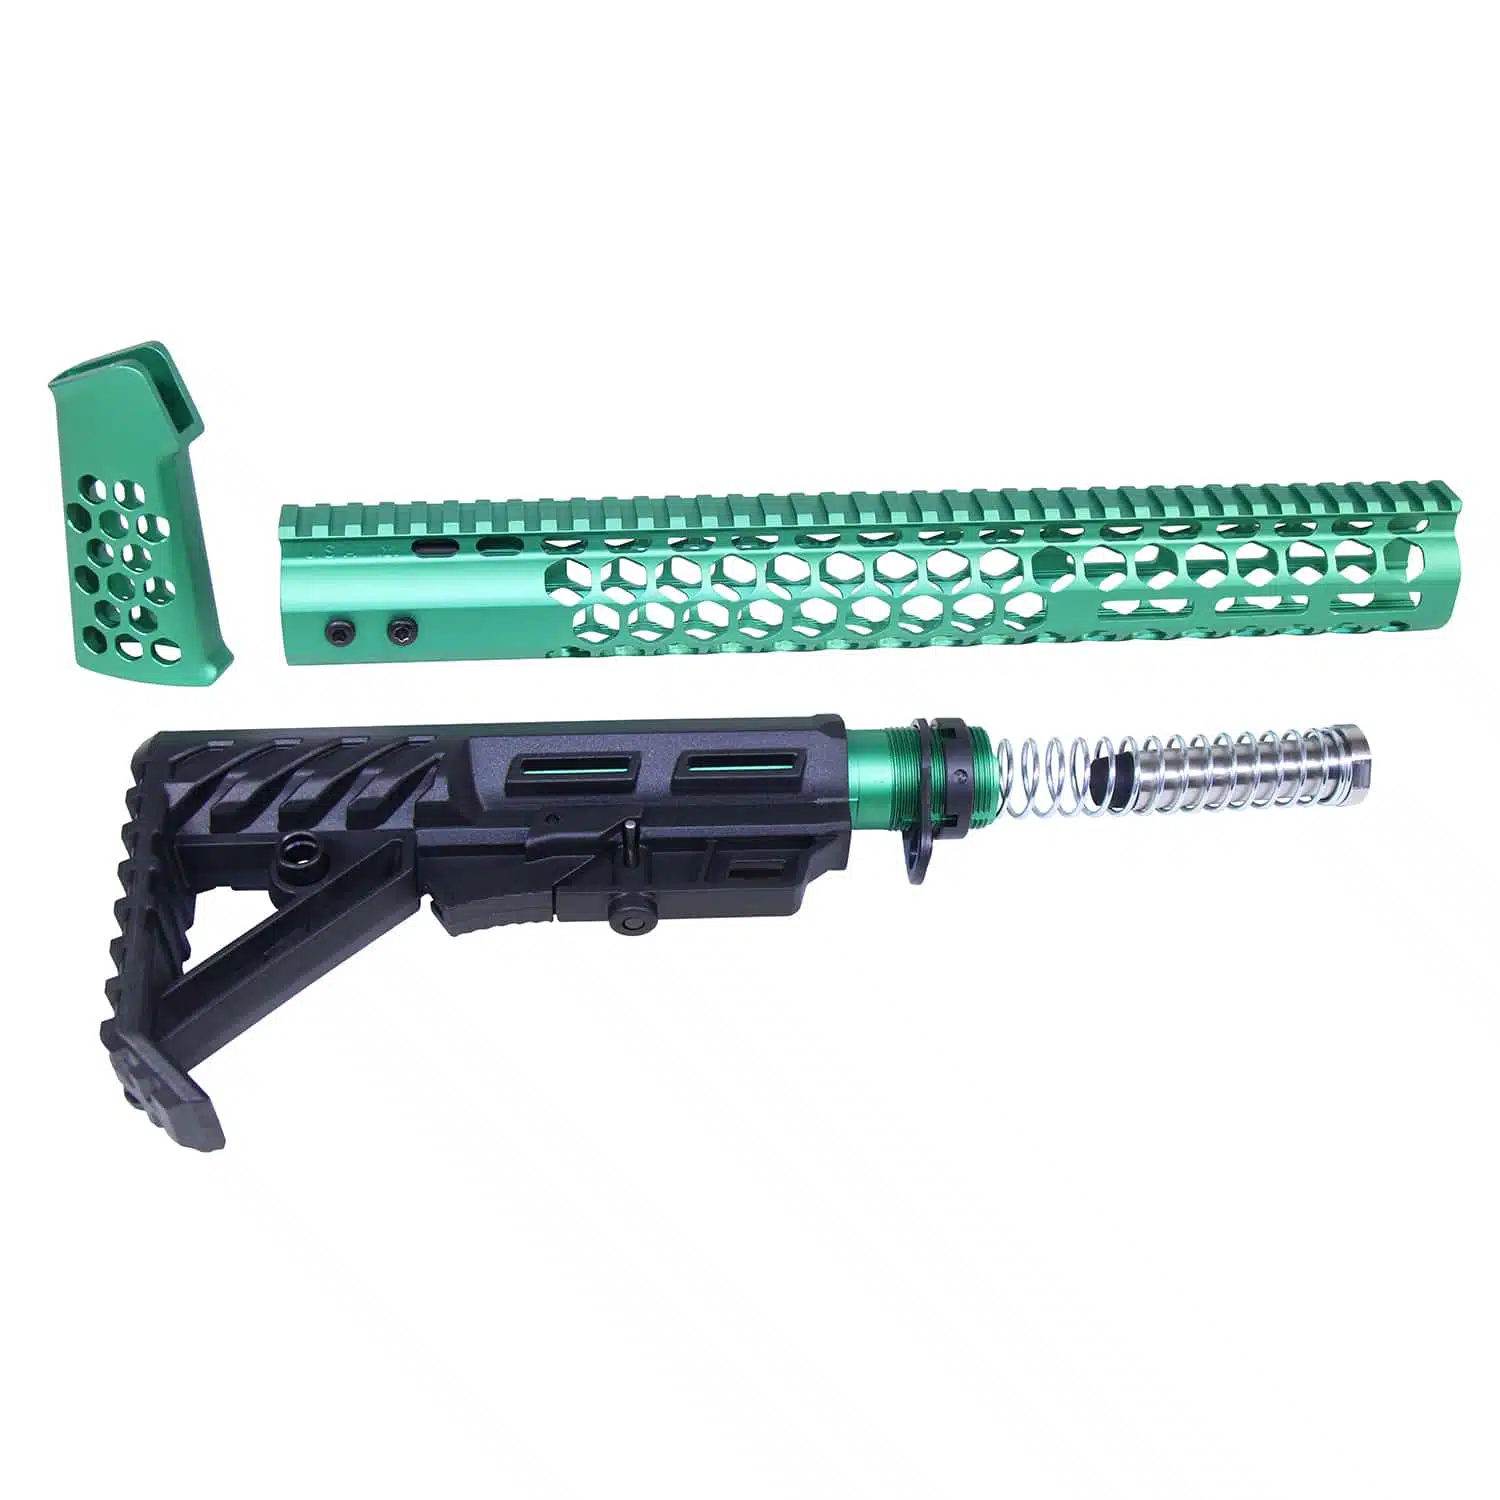 AR-15 Honeycomb Series Complete Rifle Furniture Set in Anodized Irish Green